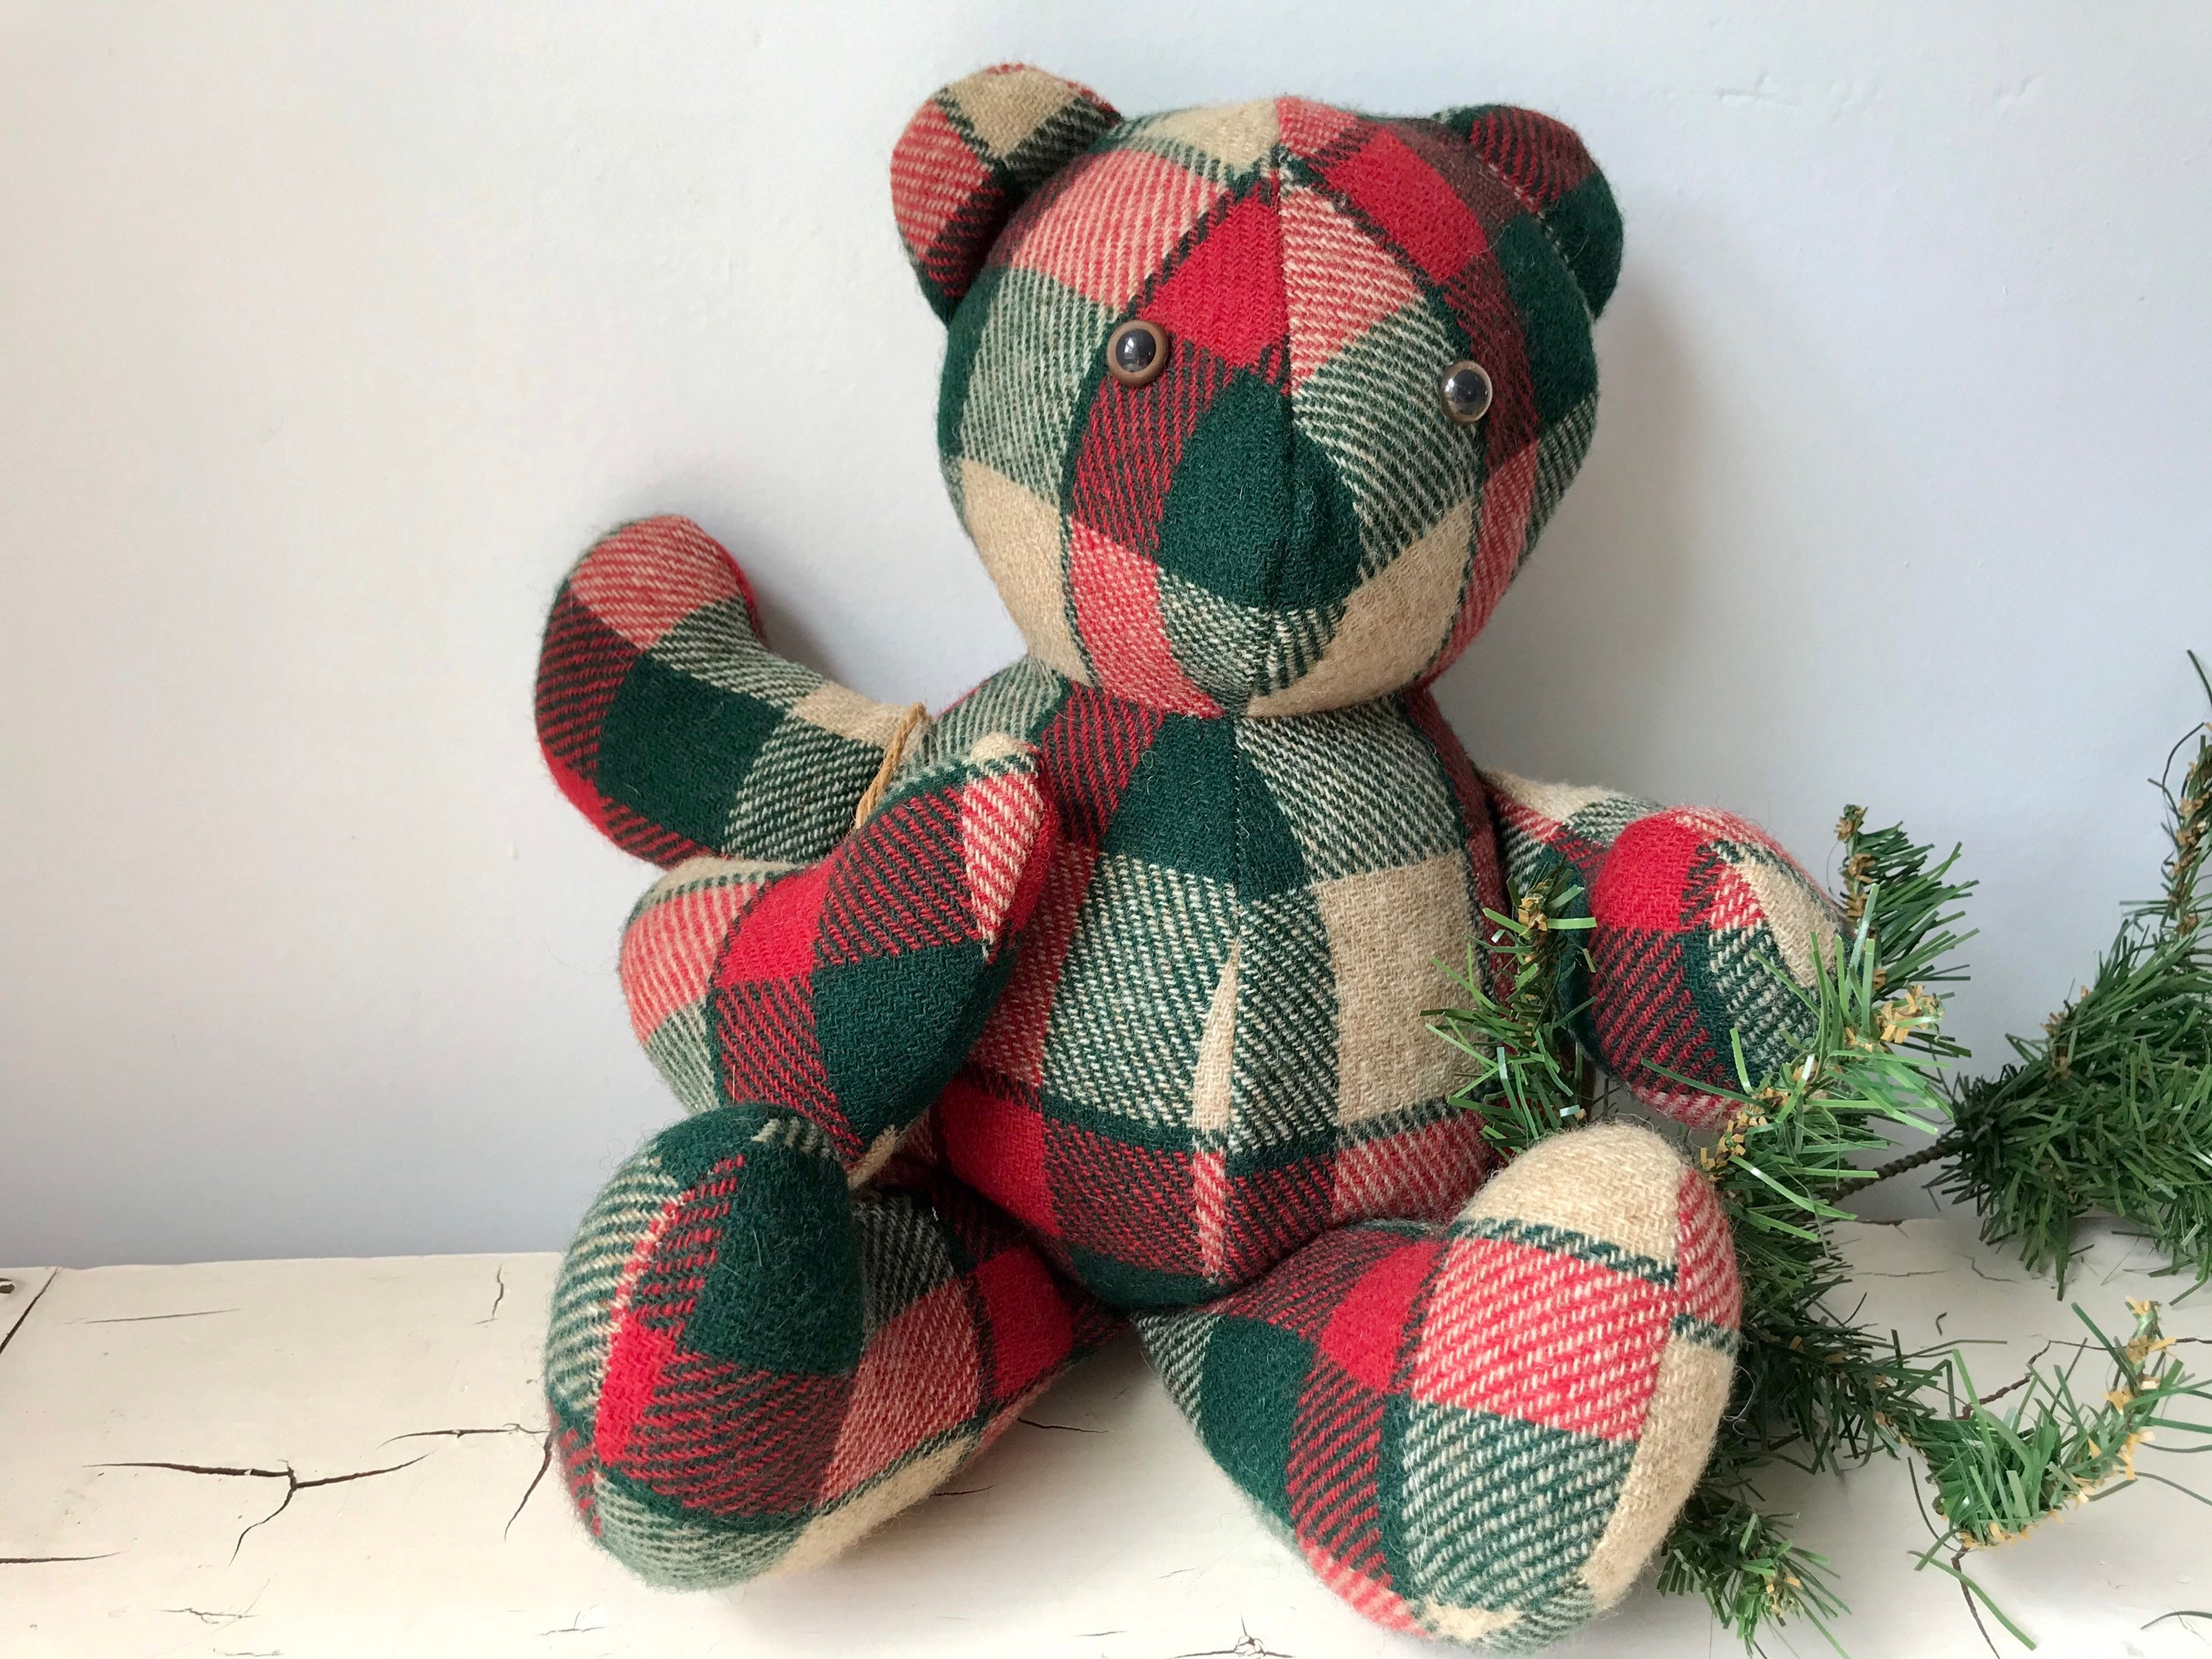 wool-plaid-fabric-teddy-bear-with-hanging-heart-ornament-etsy